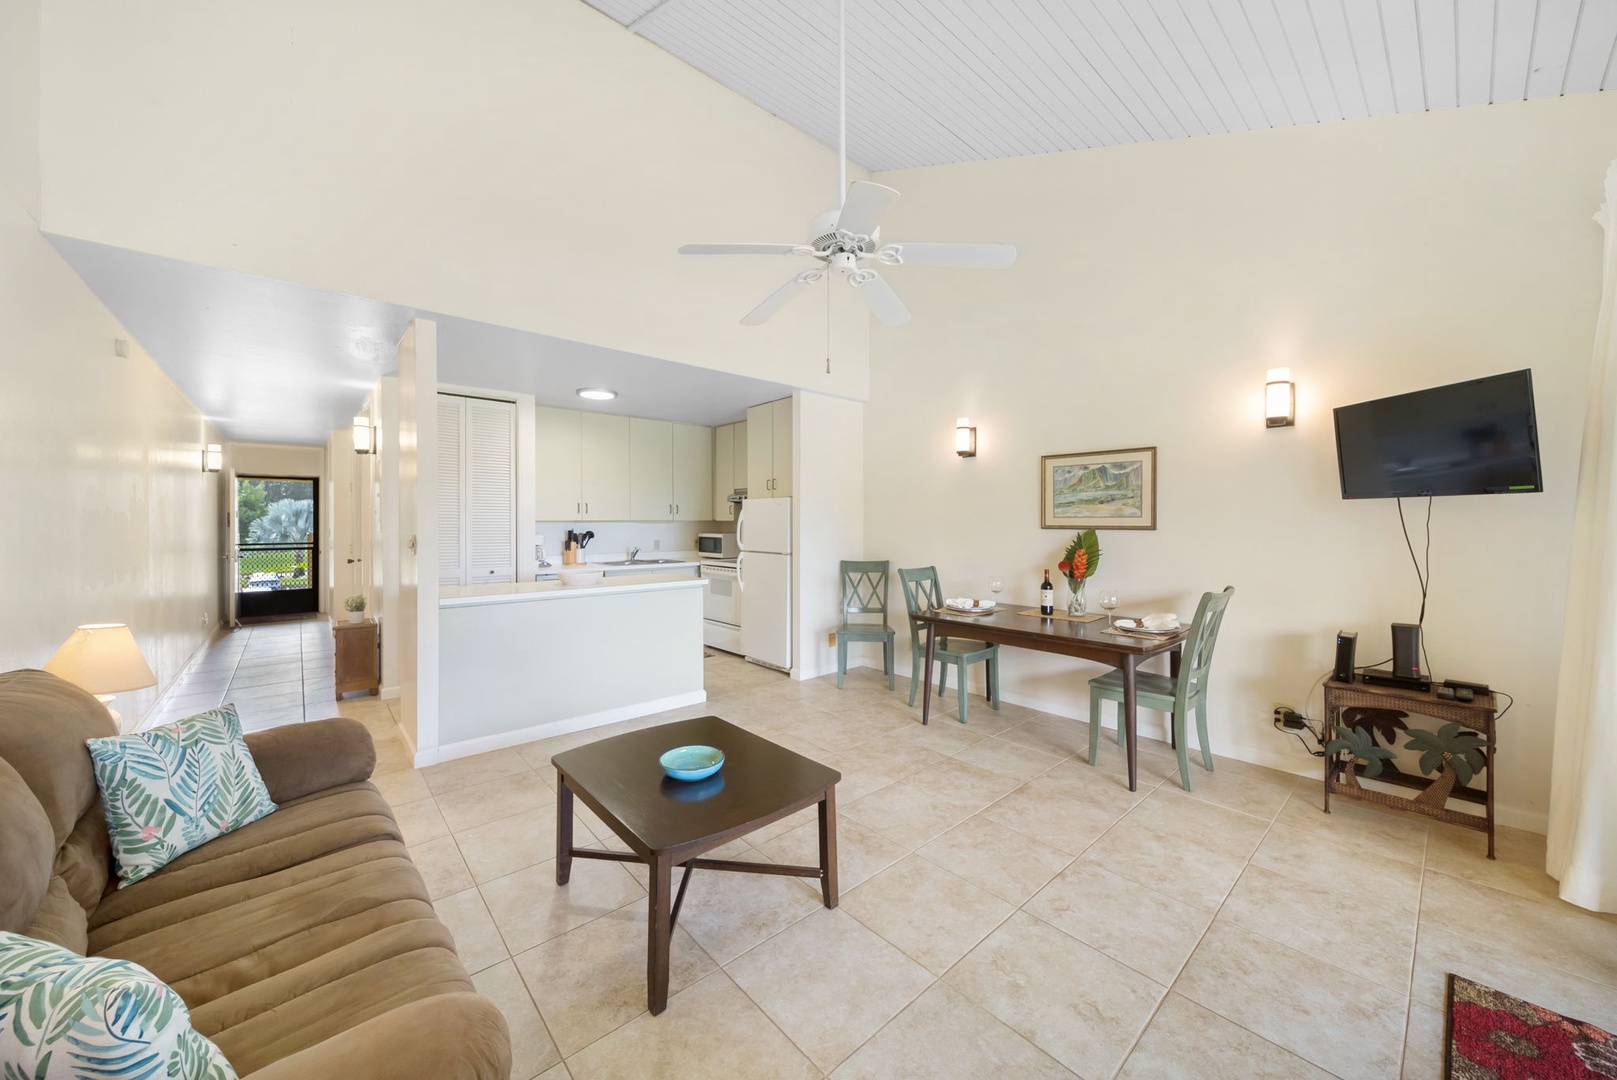 Kahuku Vacation Rentals, Kuilima Estates East #164 - This inviting property will make you feel at home with its open-concept design.